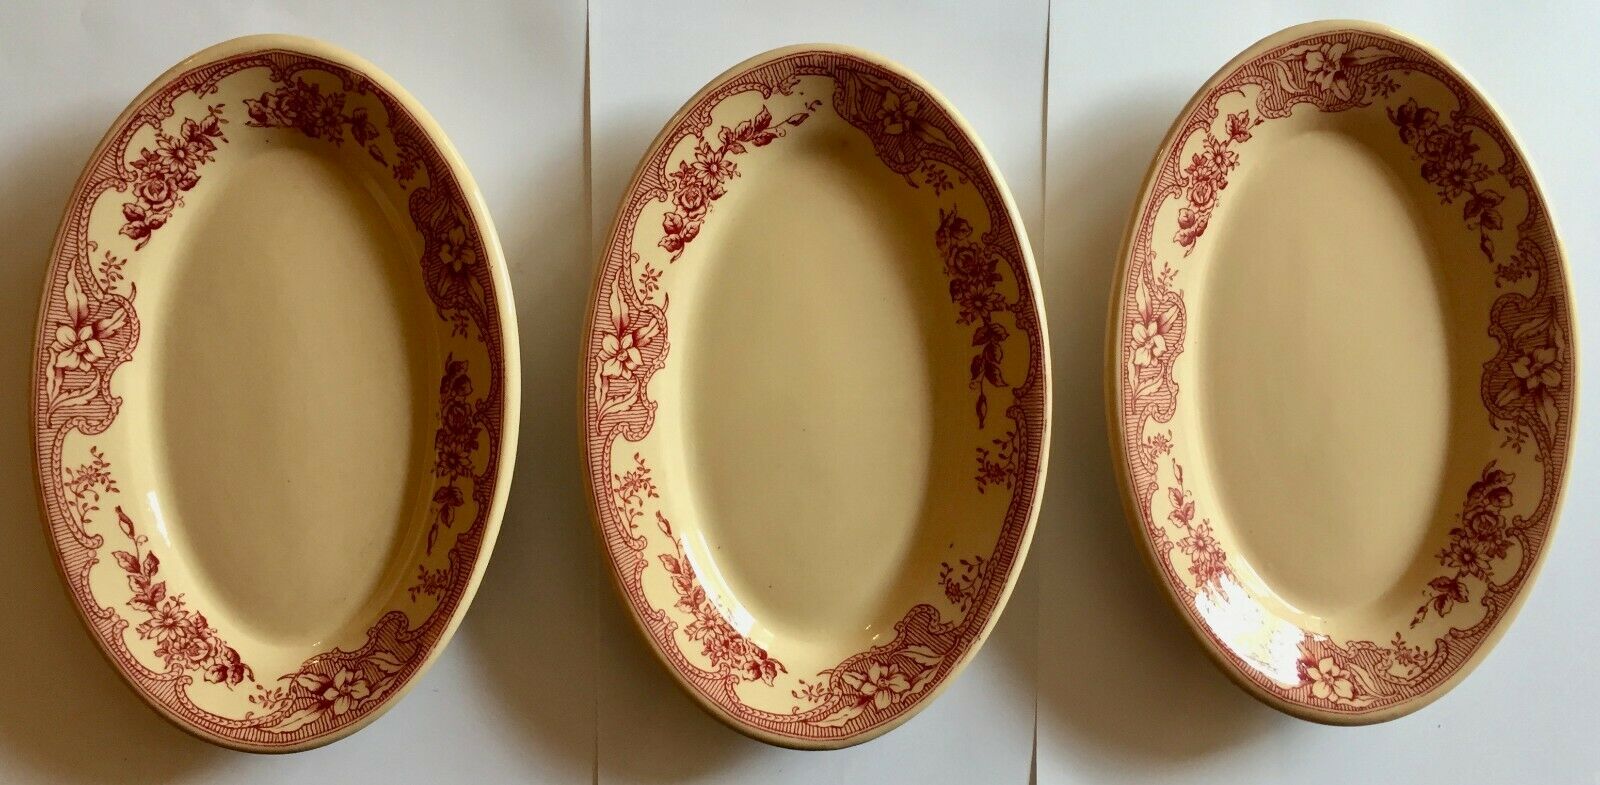 3 Rare Vintage Wellsville China Restaurant Ware Majestic Red San-tan Oval Plates